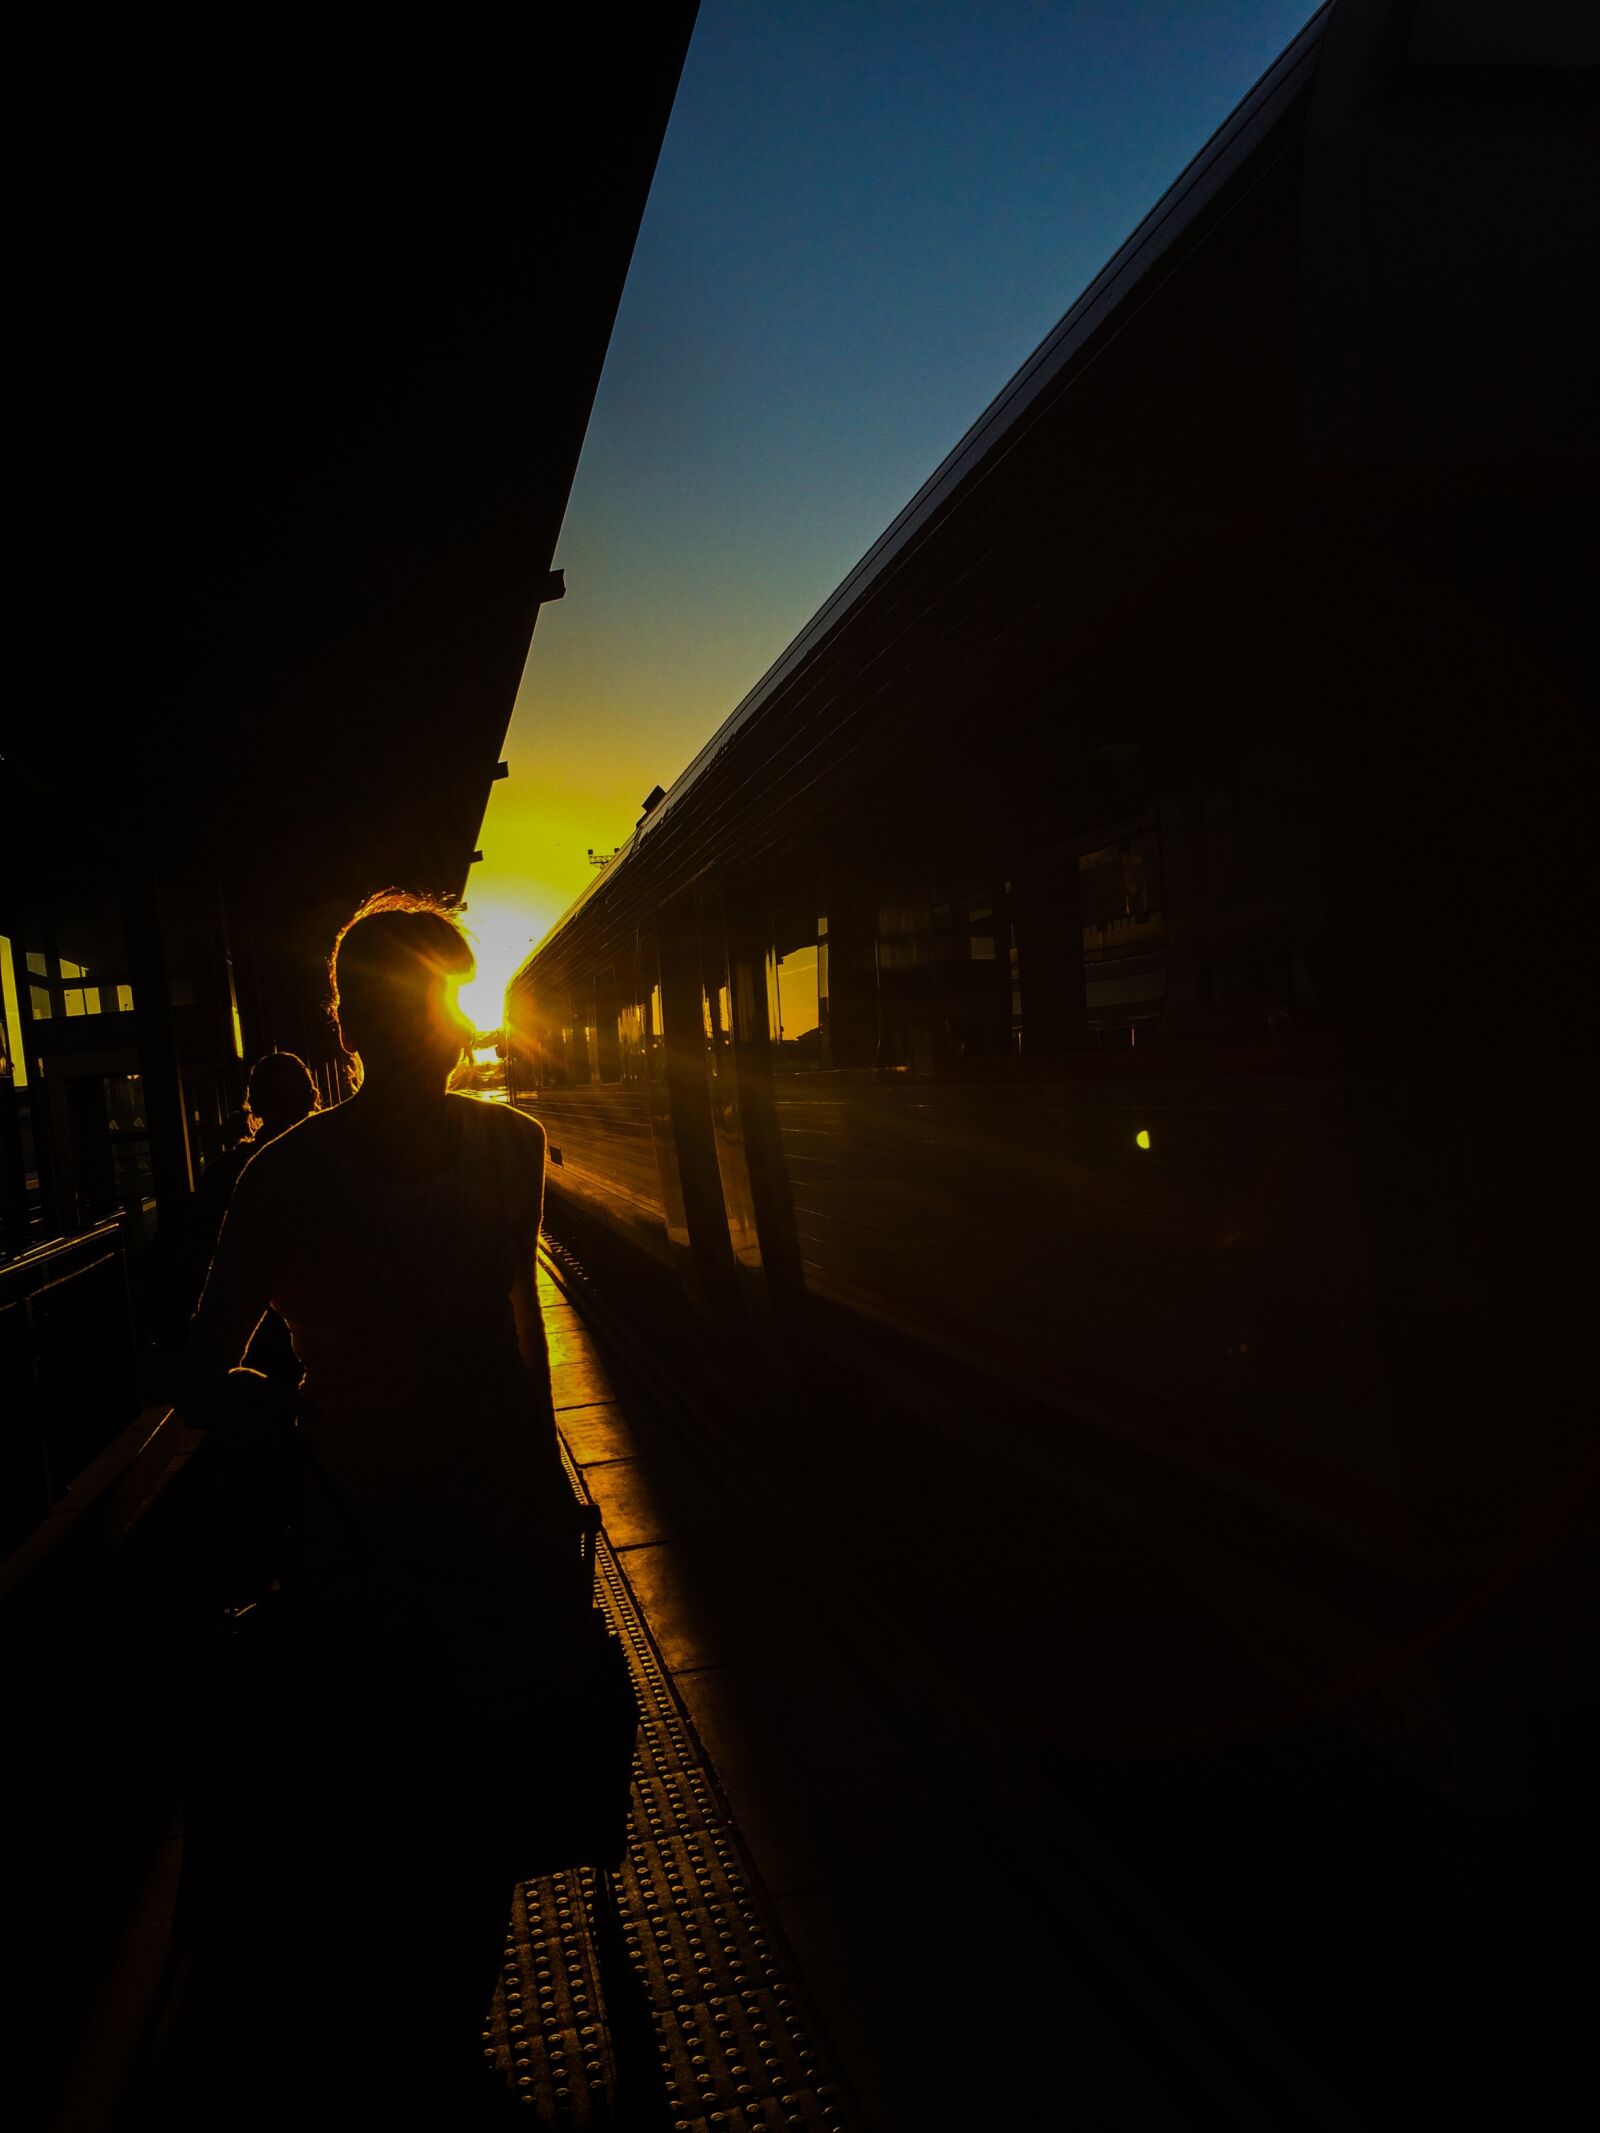 Apple iPhone 5s + iPhone 5s back camera 4.12mm f/2.2 sample photo. Train, sunset, transport photography